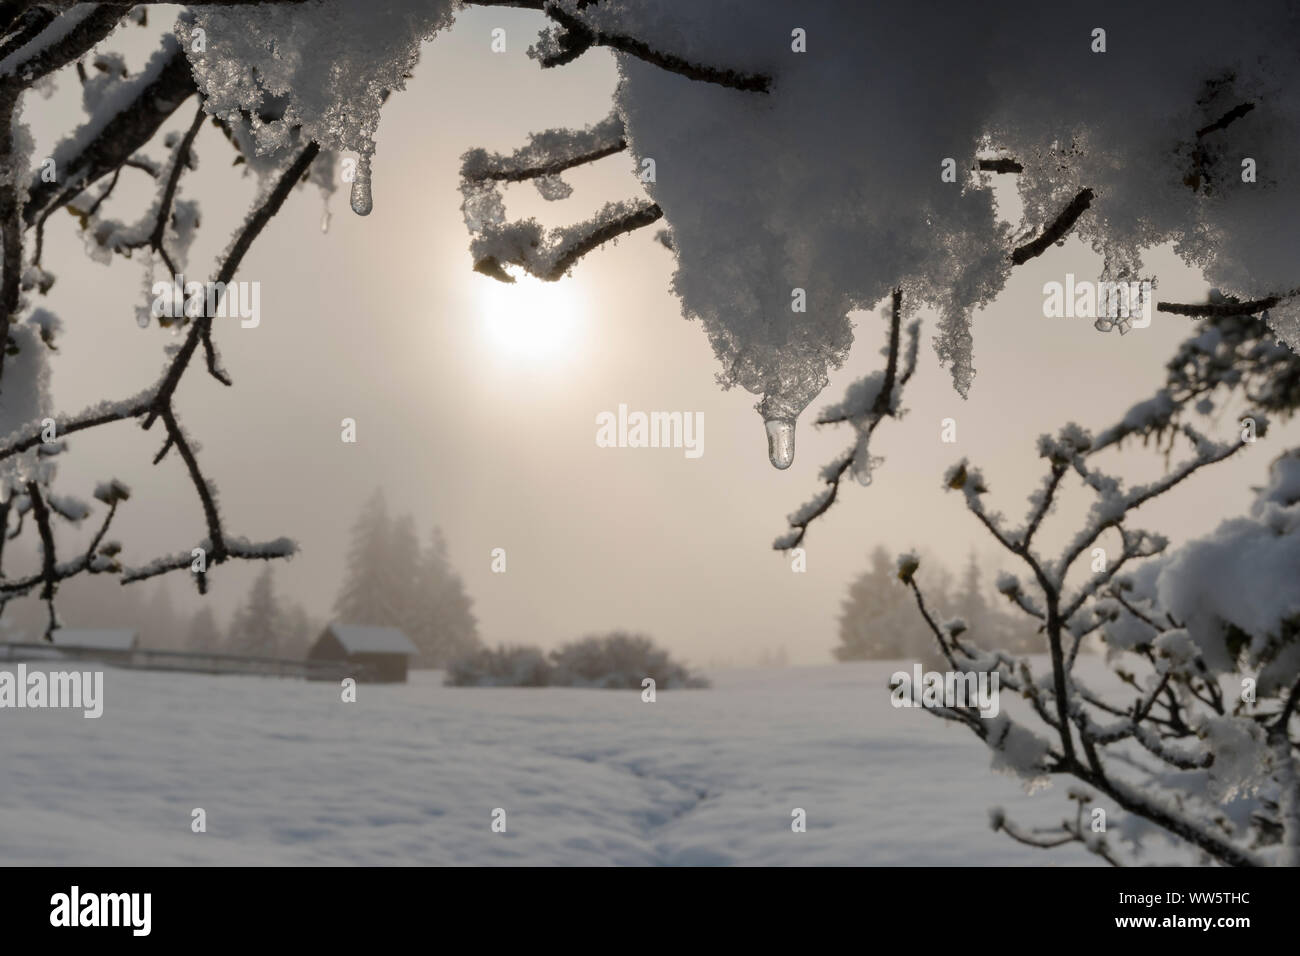 Foggy sunrise in wintry alpine rolling landscape. In the foreground branches, snow and ice, in the background snow-covered mountain huts and the sun rising in the fog. Stock Photo